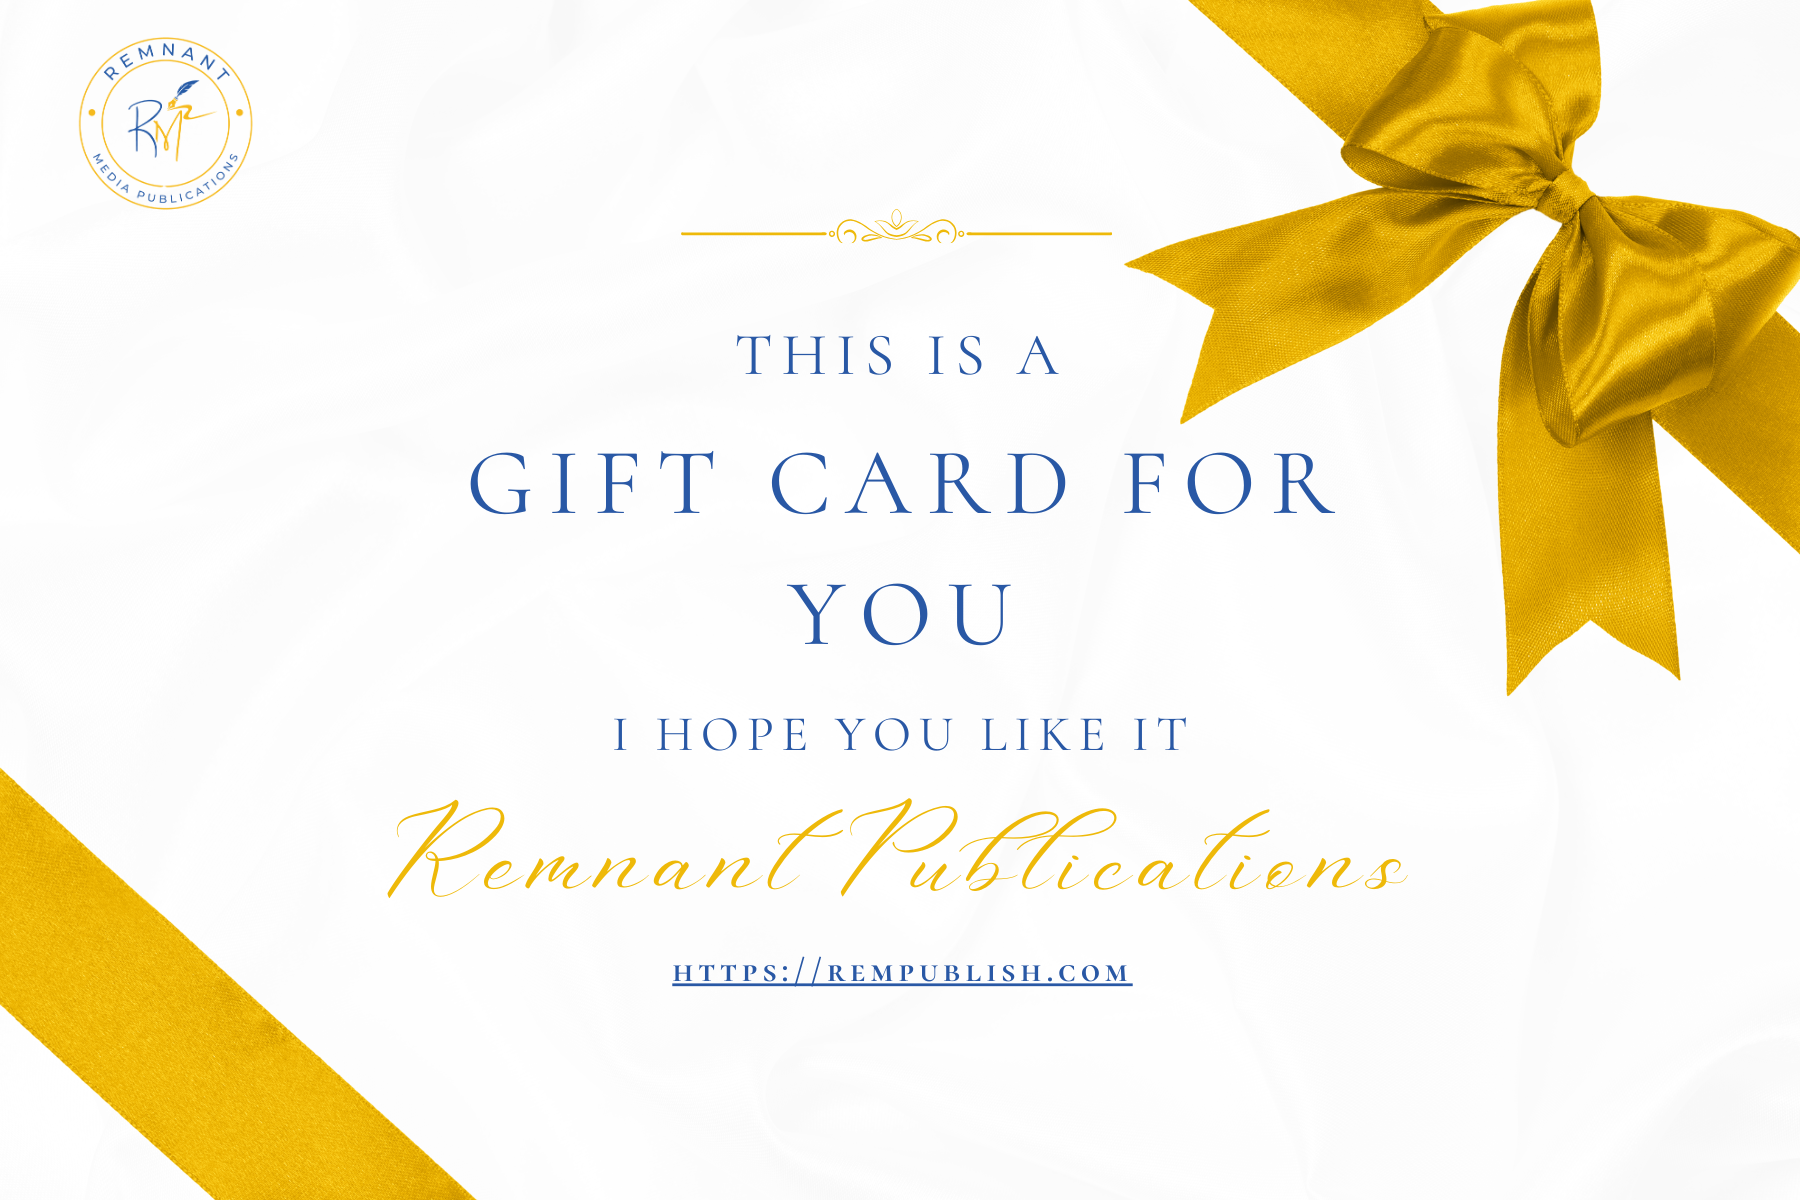 Remnant Publications Gift Card